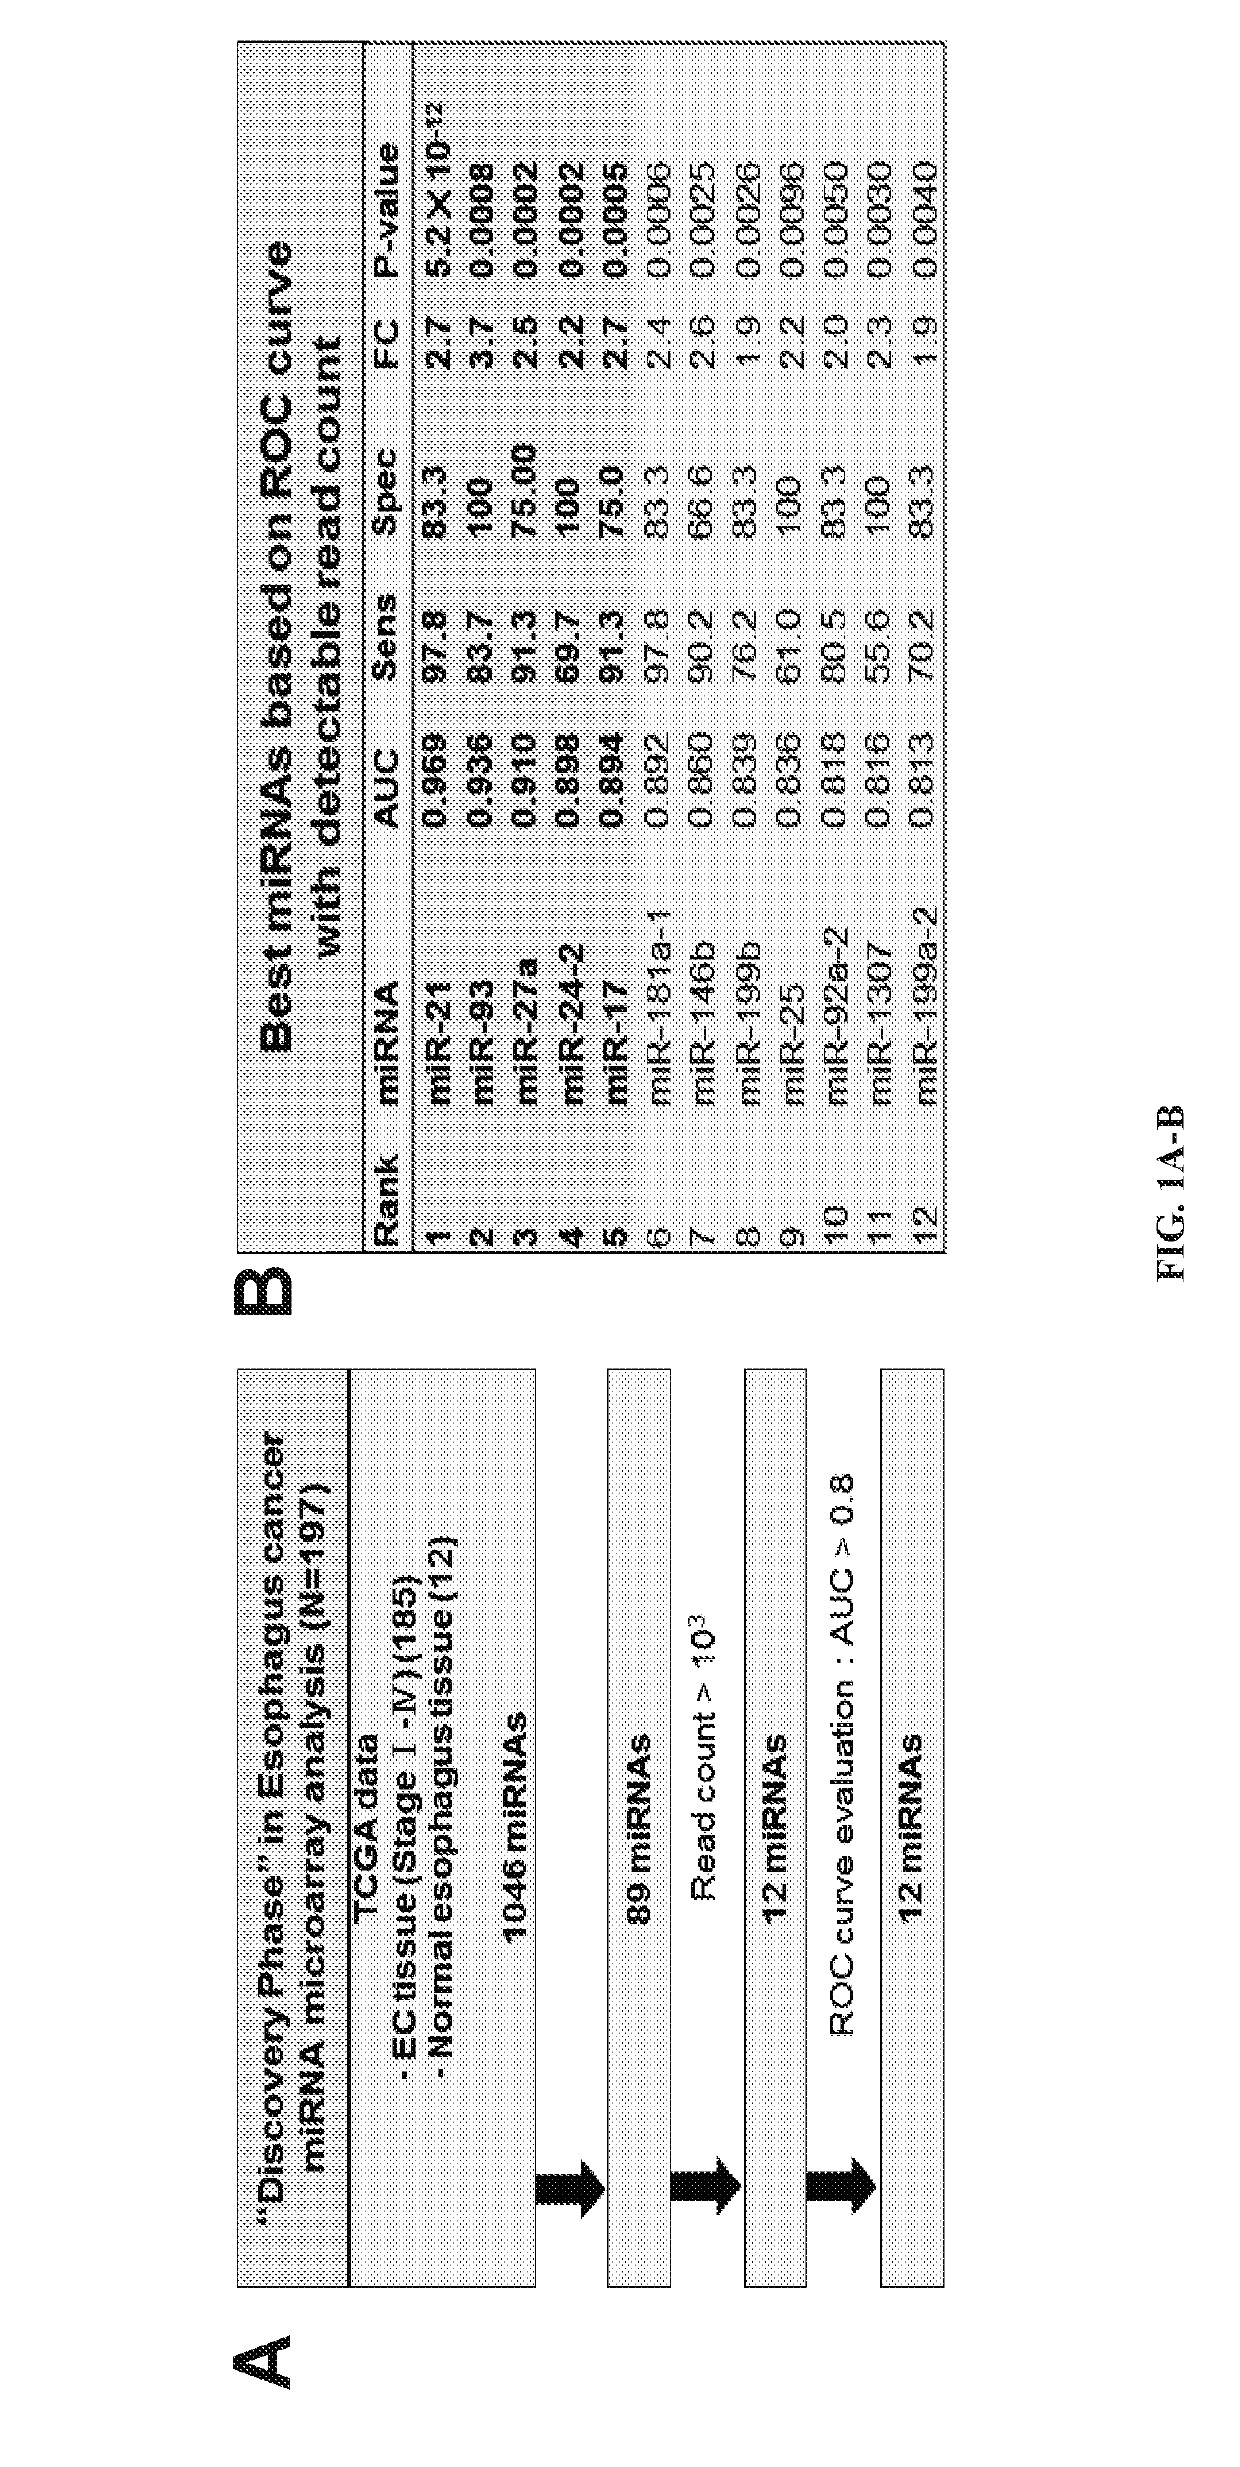 Methods for diagnosing and treating esophageal cancer